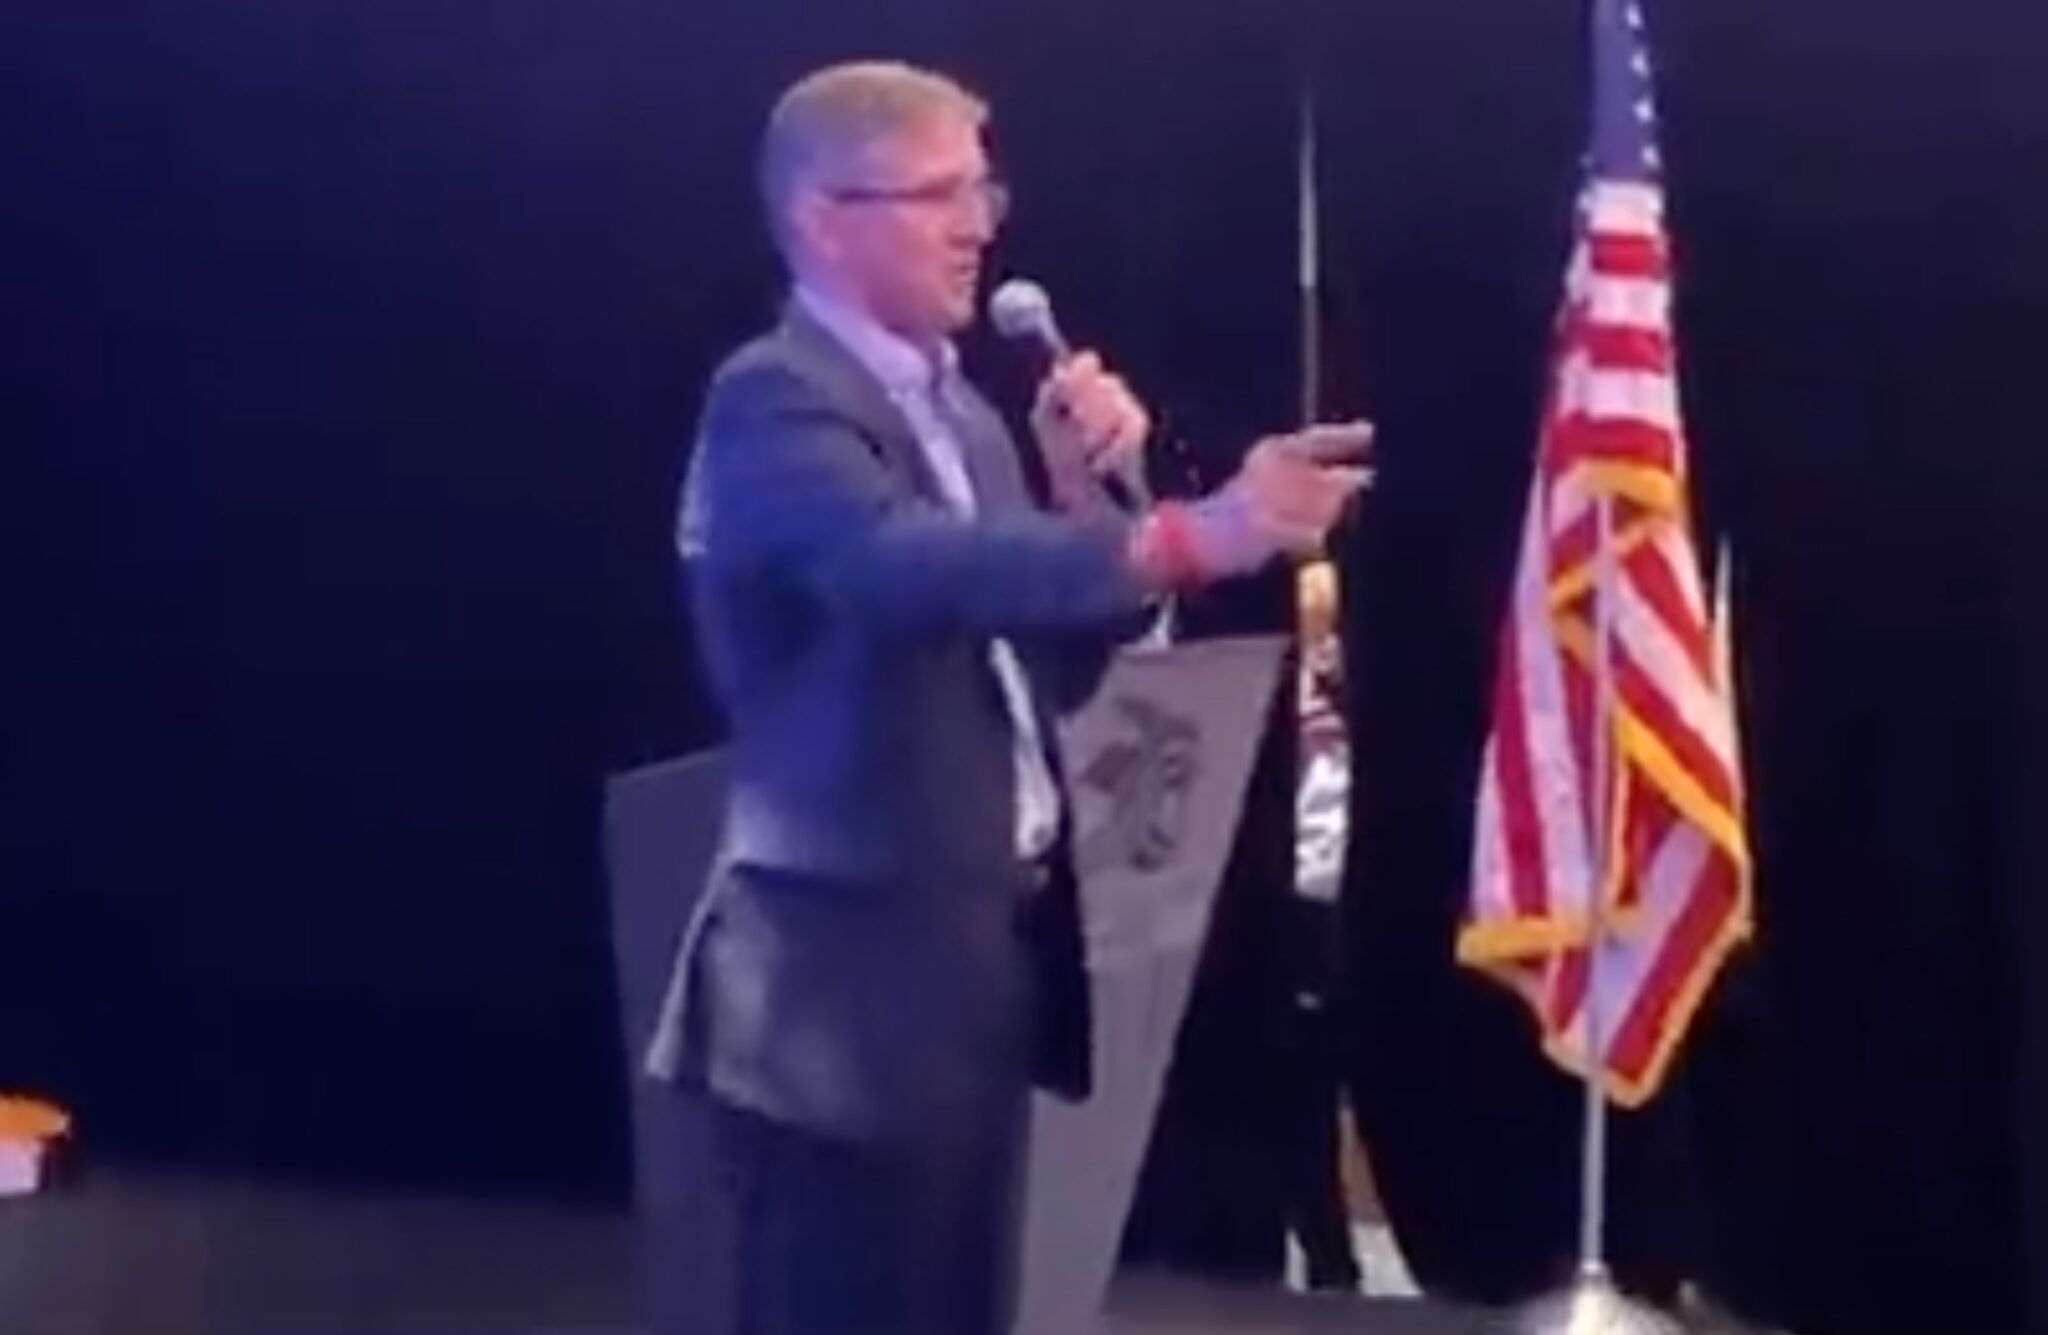 Michael Flynn Predicts State Governors Will Soon ‘Declare War’ in Shocking Arizona Campaign Speech (mediaite.com)